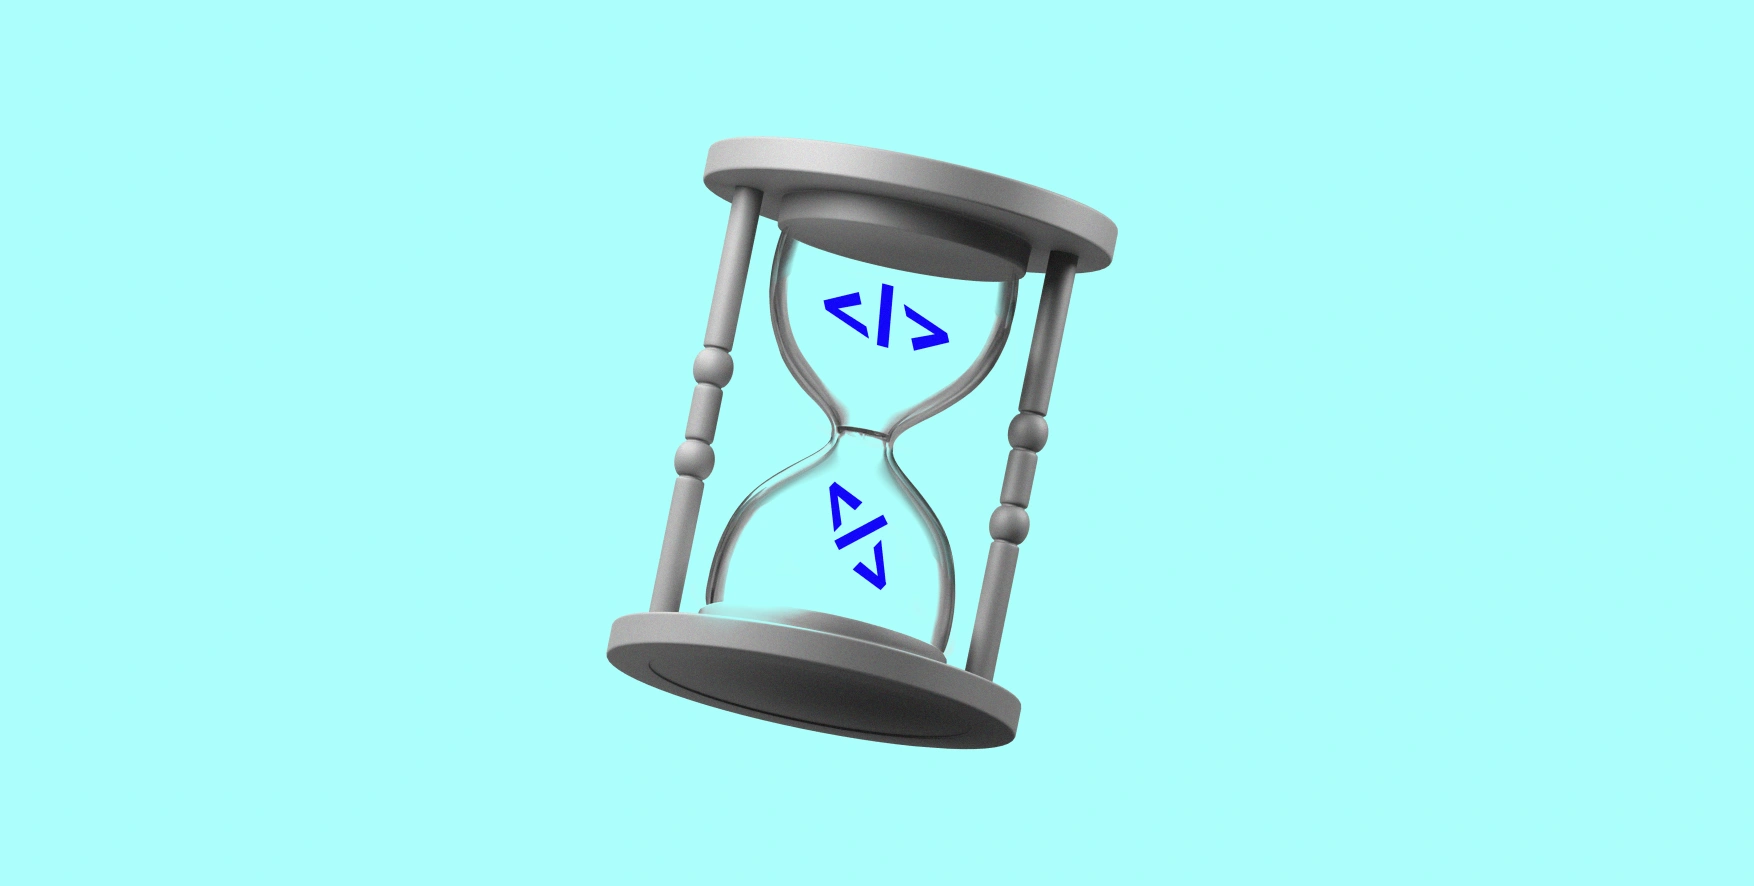 hourglass with development tag symbols inside